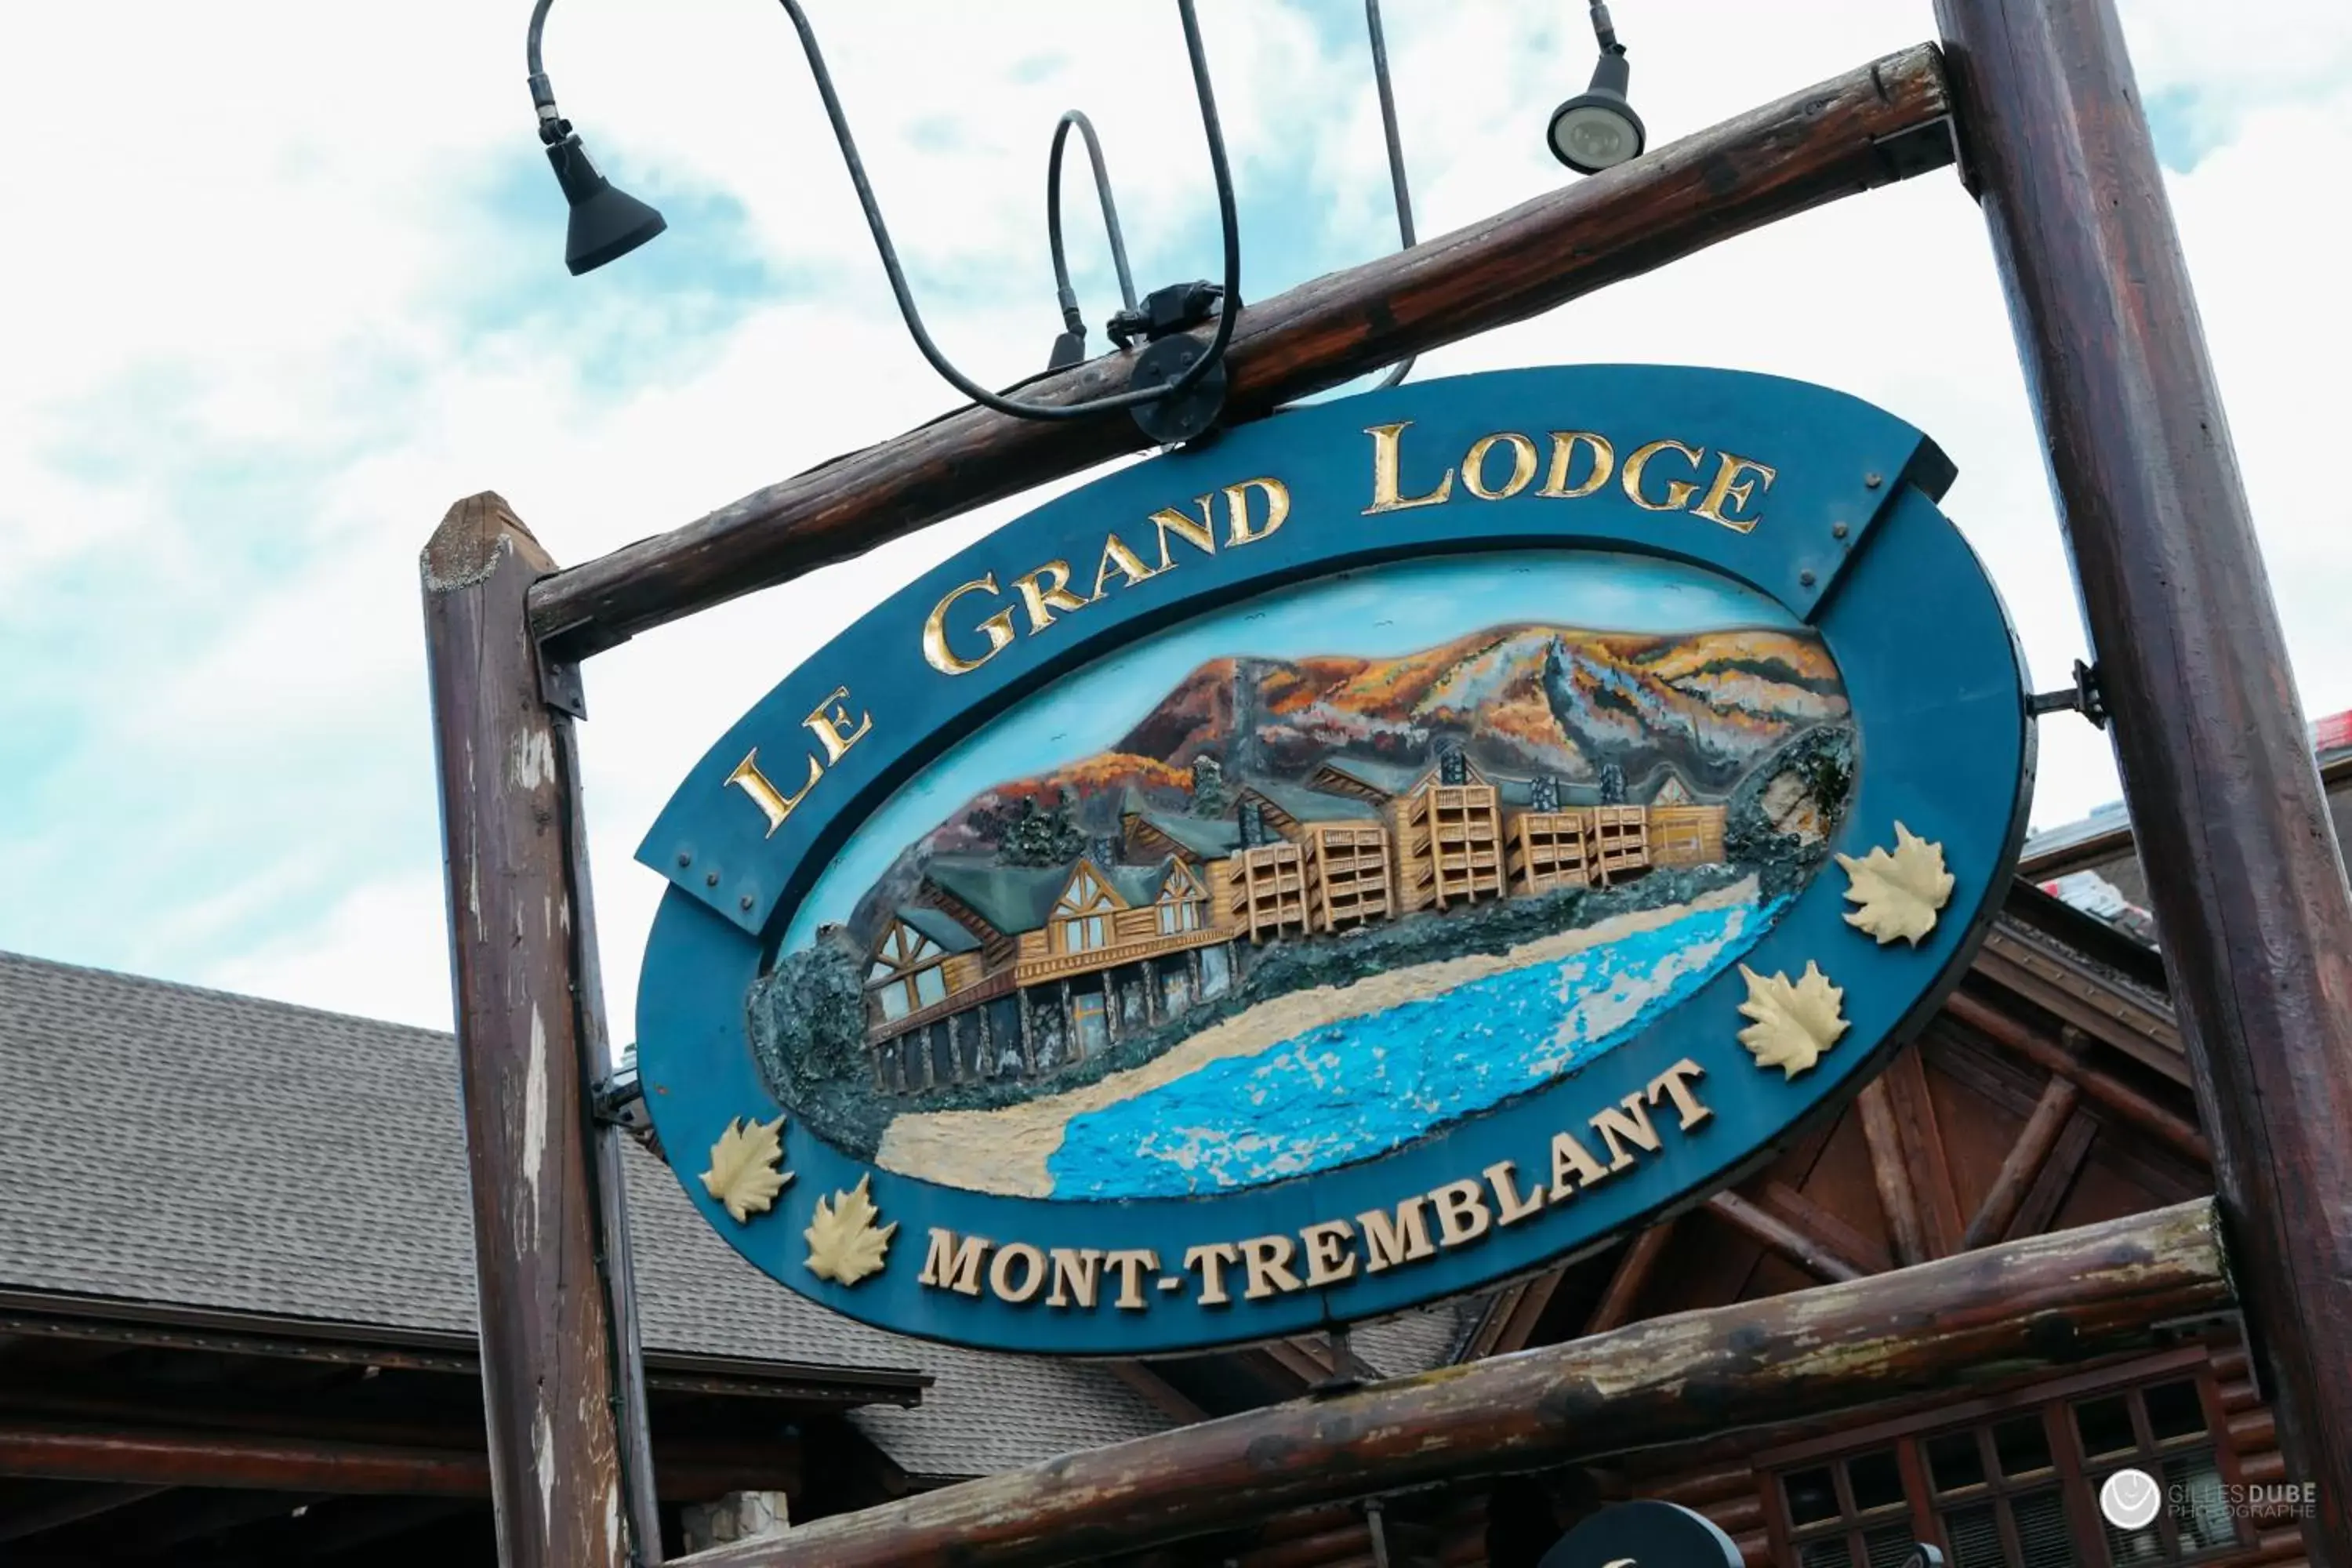 Property logo or sign in Le Grand Lodge Mont Tremblant